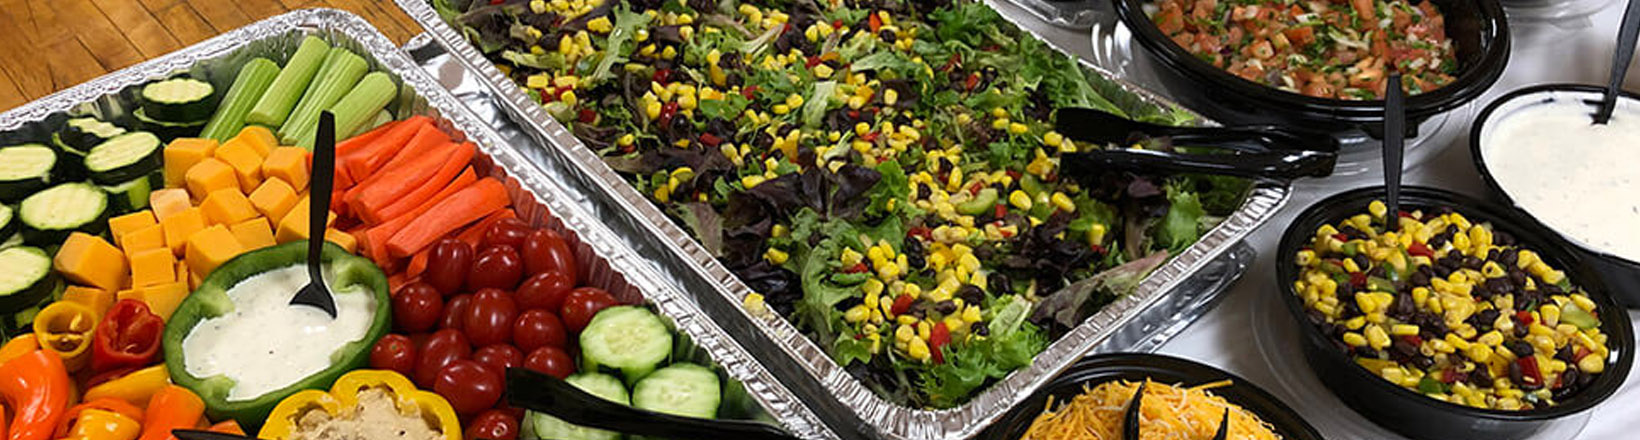 food in trays - catering healthy food